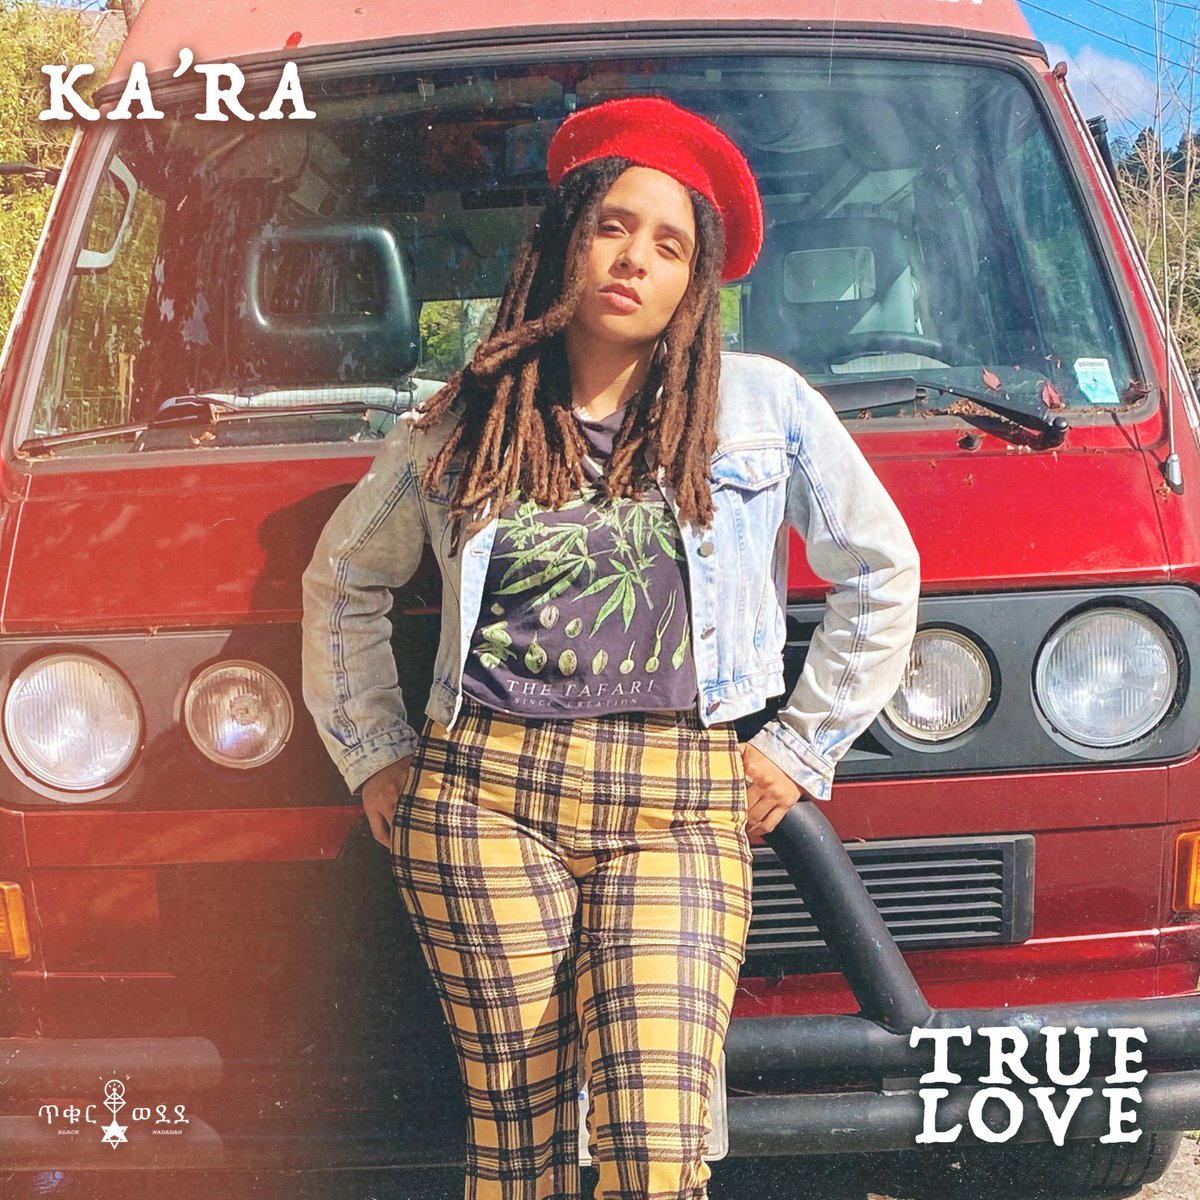 This Friday @karasmusica new music inna version stylee with a sound called #TrueLove originally sang by #WhiteMice.